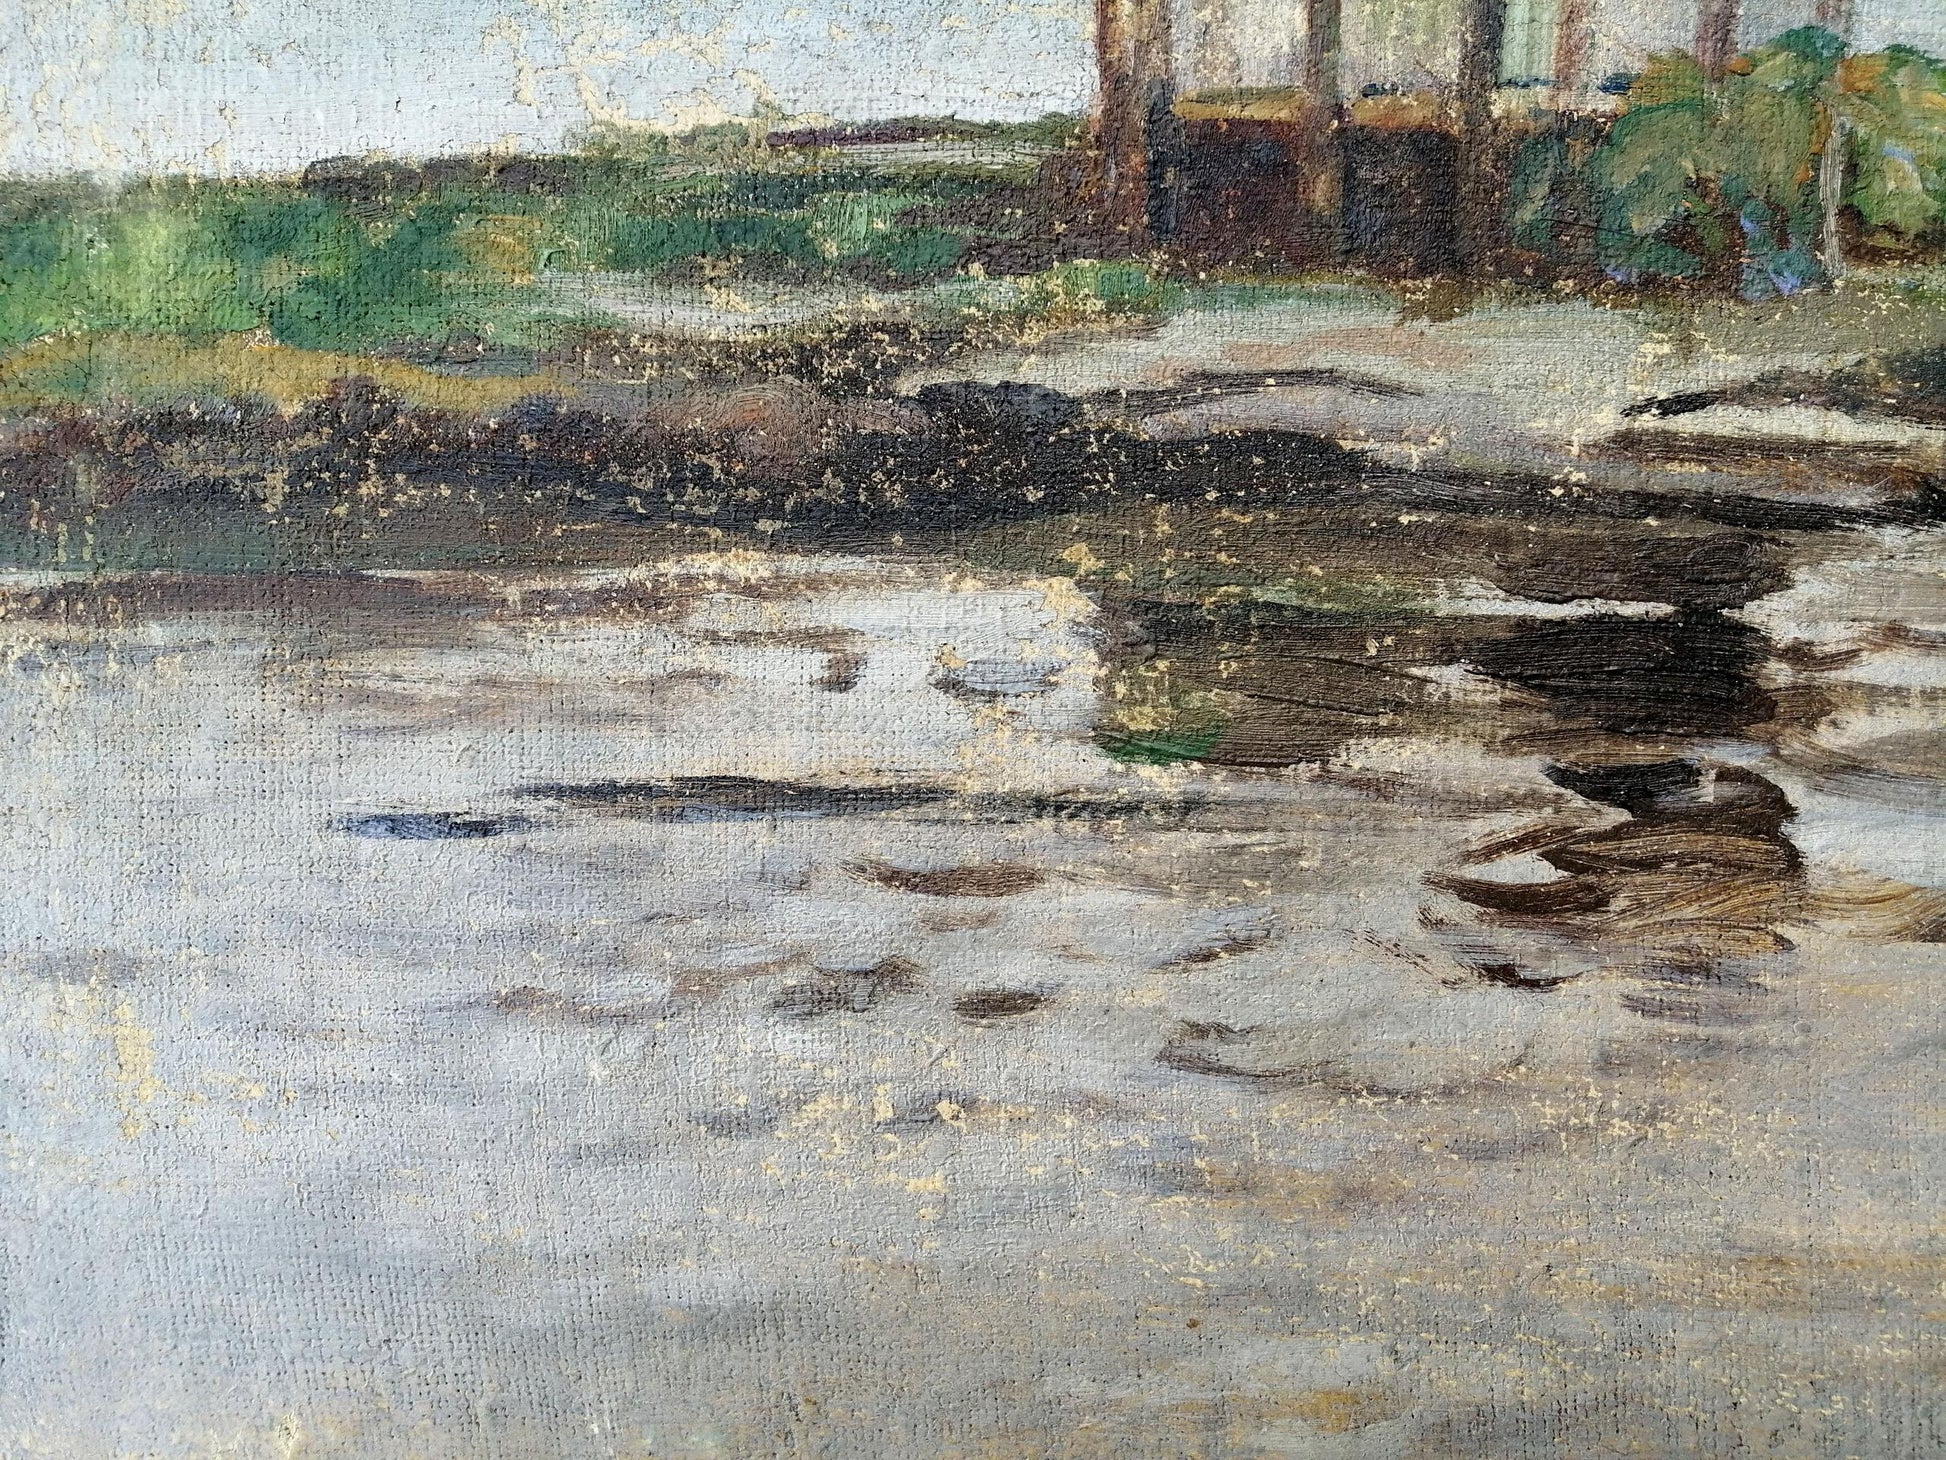 Rest by the River captured on canvas in oil by an unknown artist